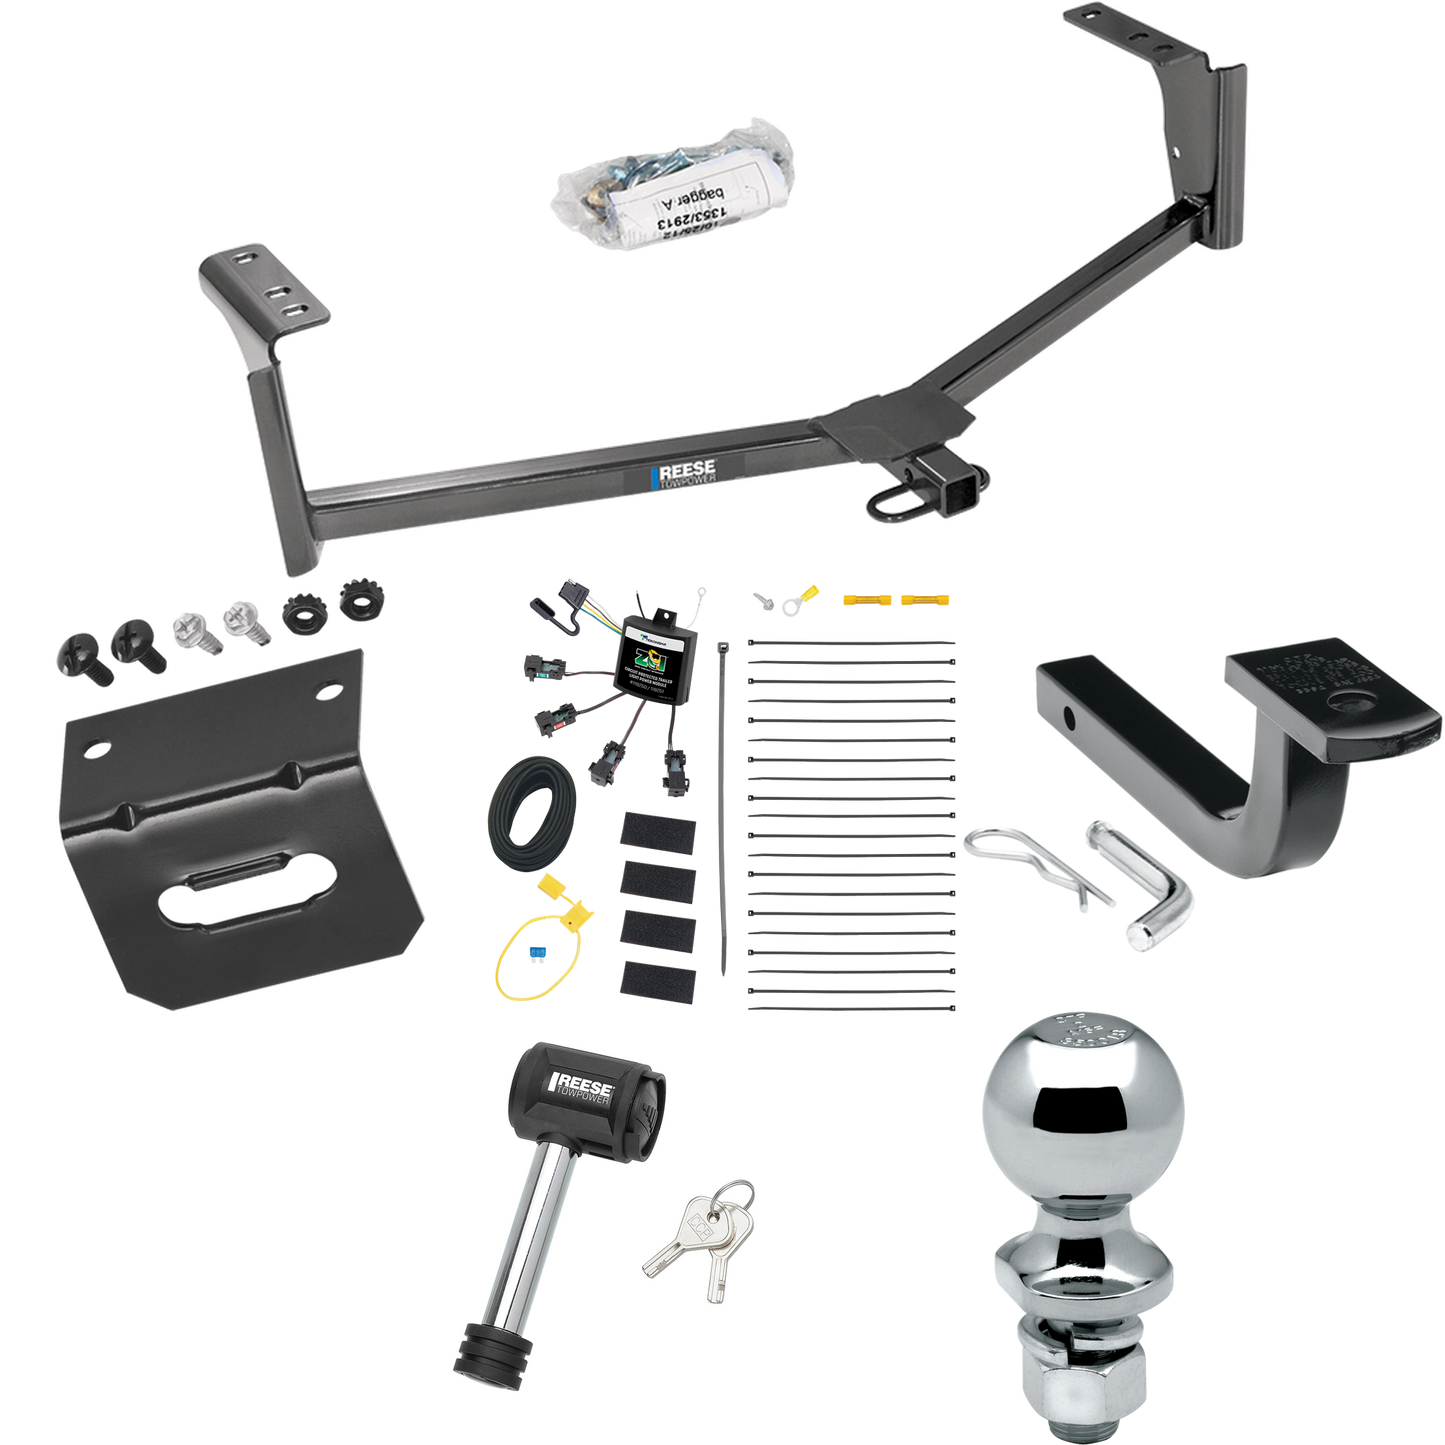 Fits 2013-2020 Lincoln MKZ Trailer Hitch Tow PKG w/ 4-Flat Zero Contact "No Splice" Wiring Harness + Draw-Bar + 2" Ball + Wiring Bracket + Hitch Lock (Excludes: 3.0 Liter Engine Models) By Reese Towpower